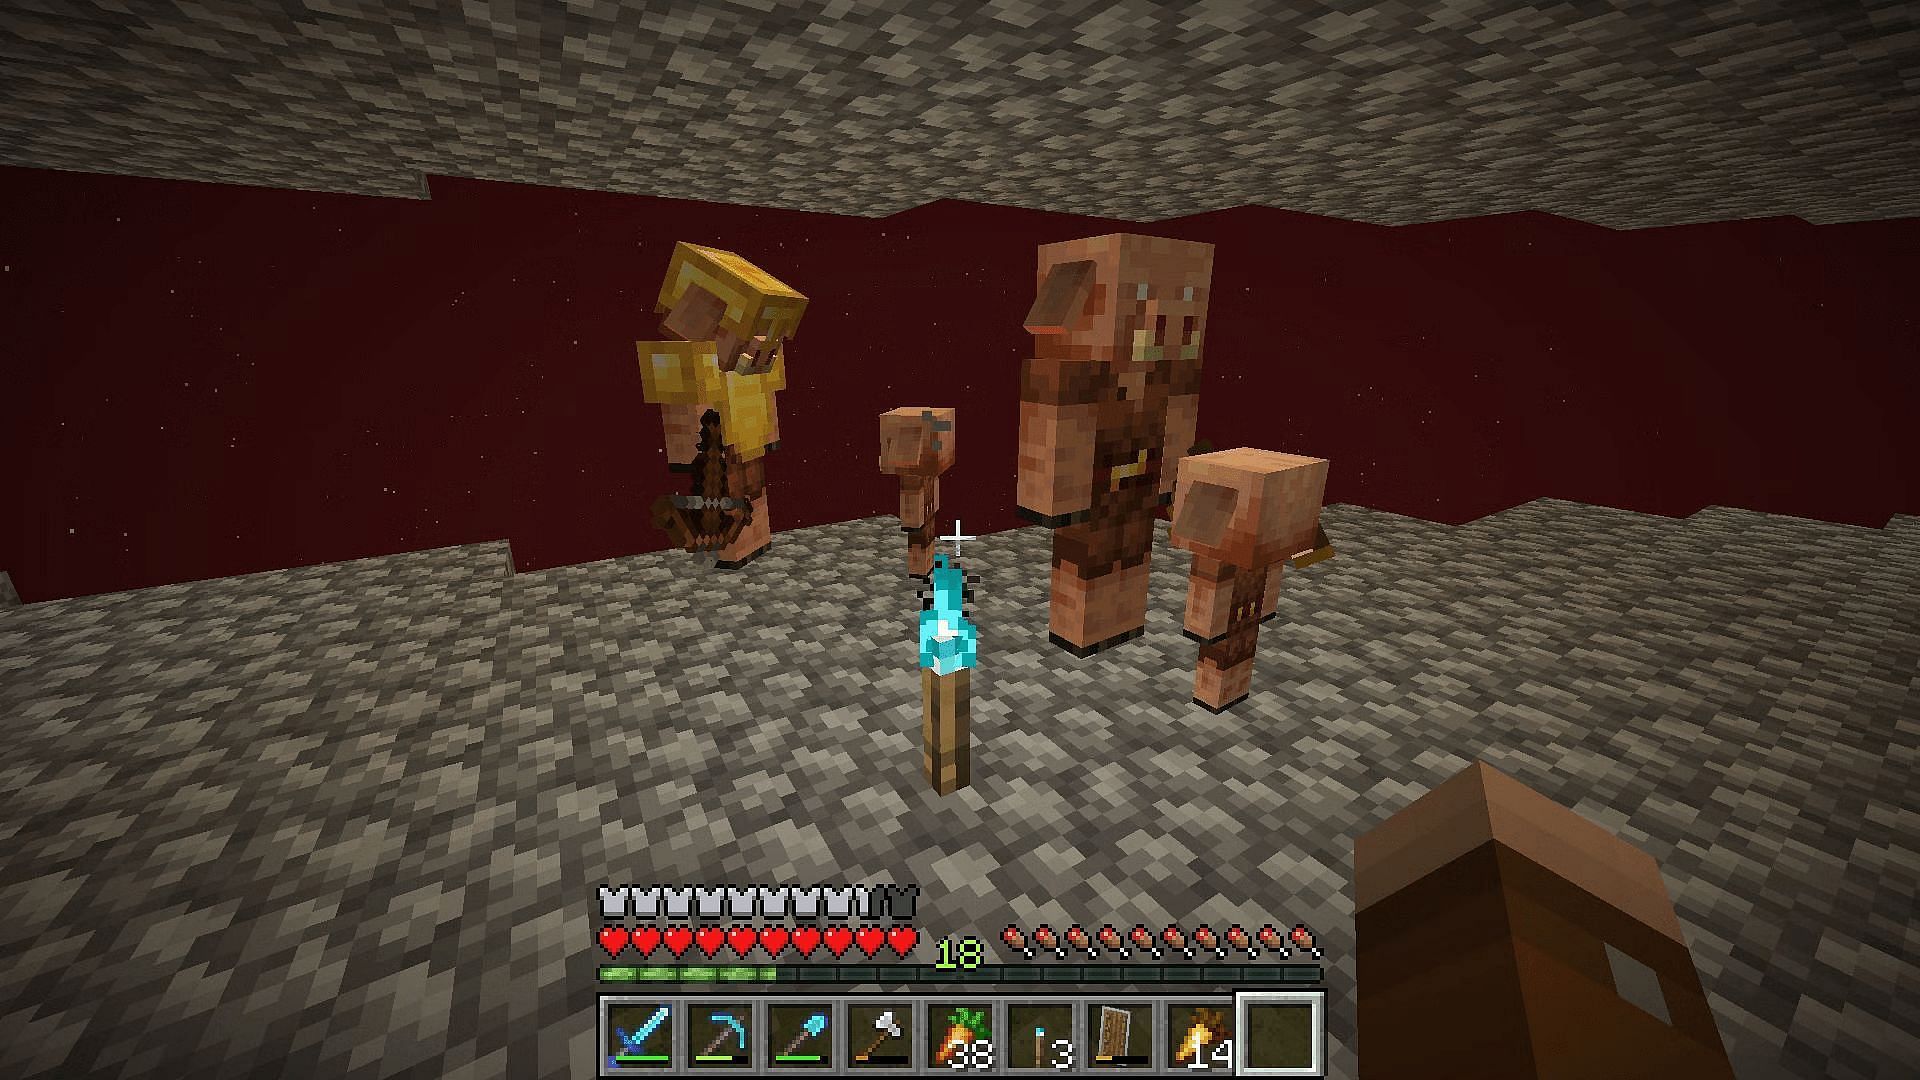 Soul torches possess a cyan coloration and can repel piglins from getting close (Image via Mojang)